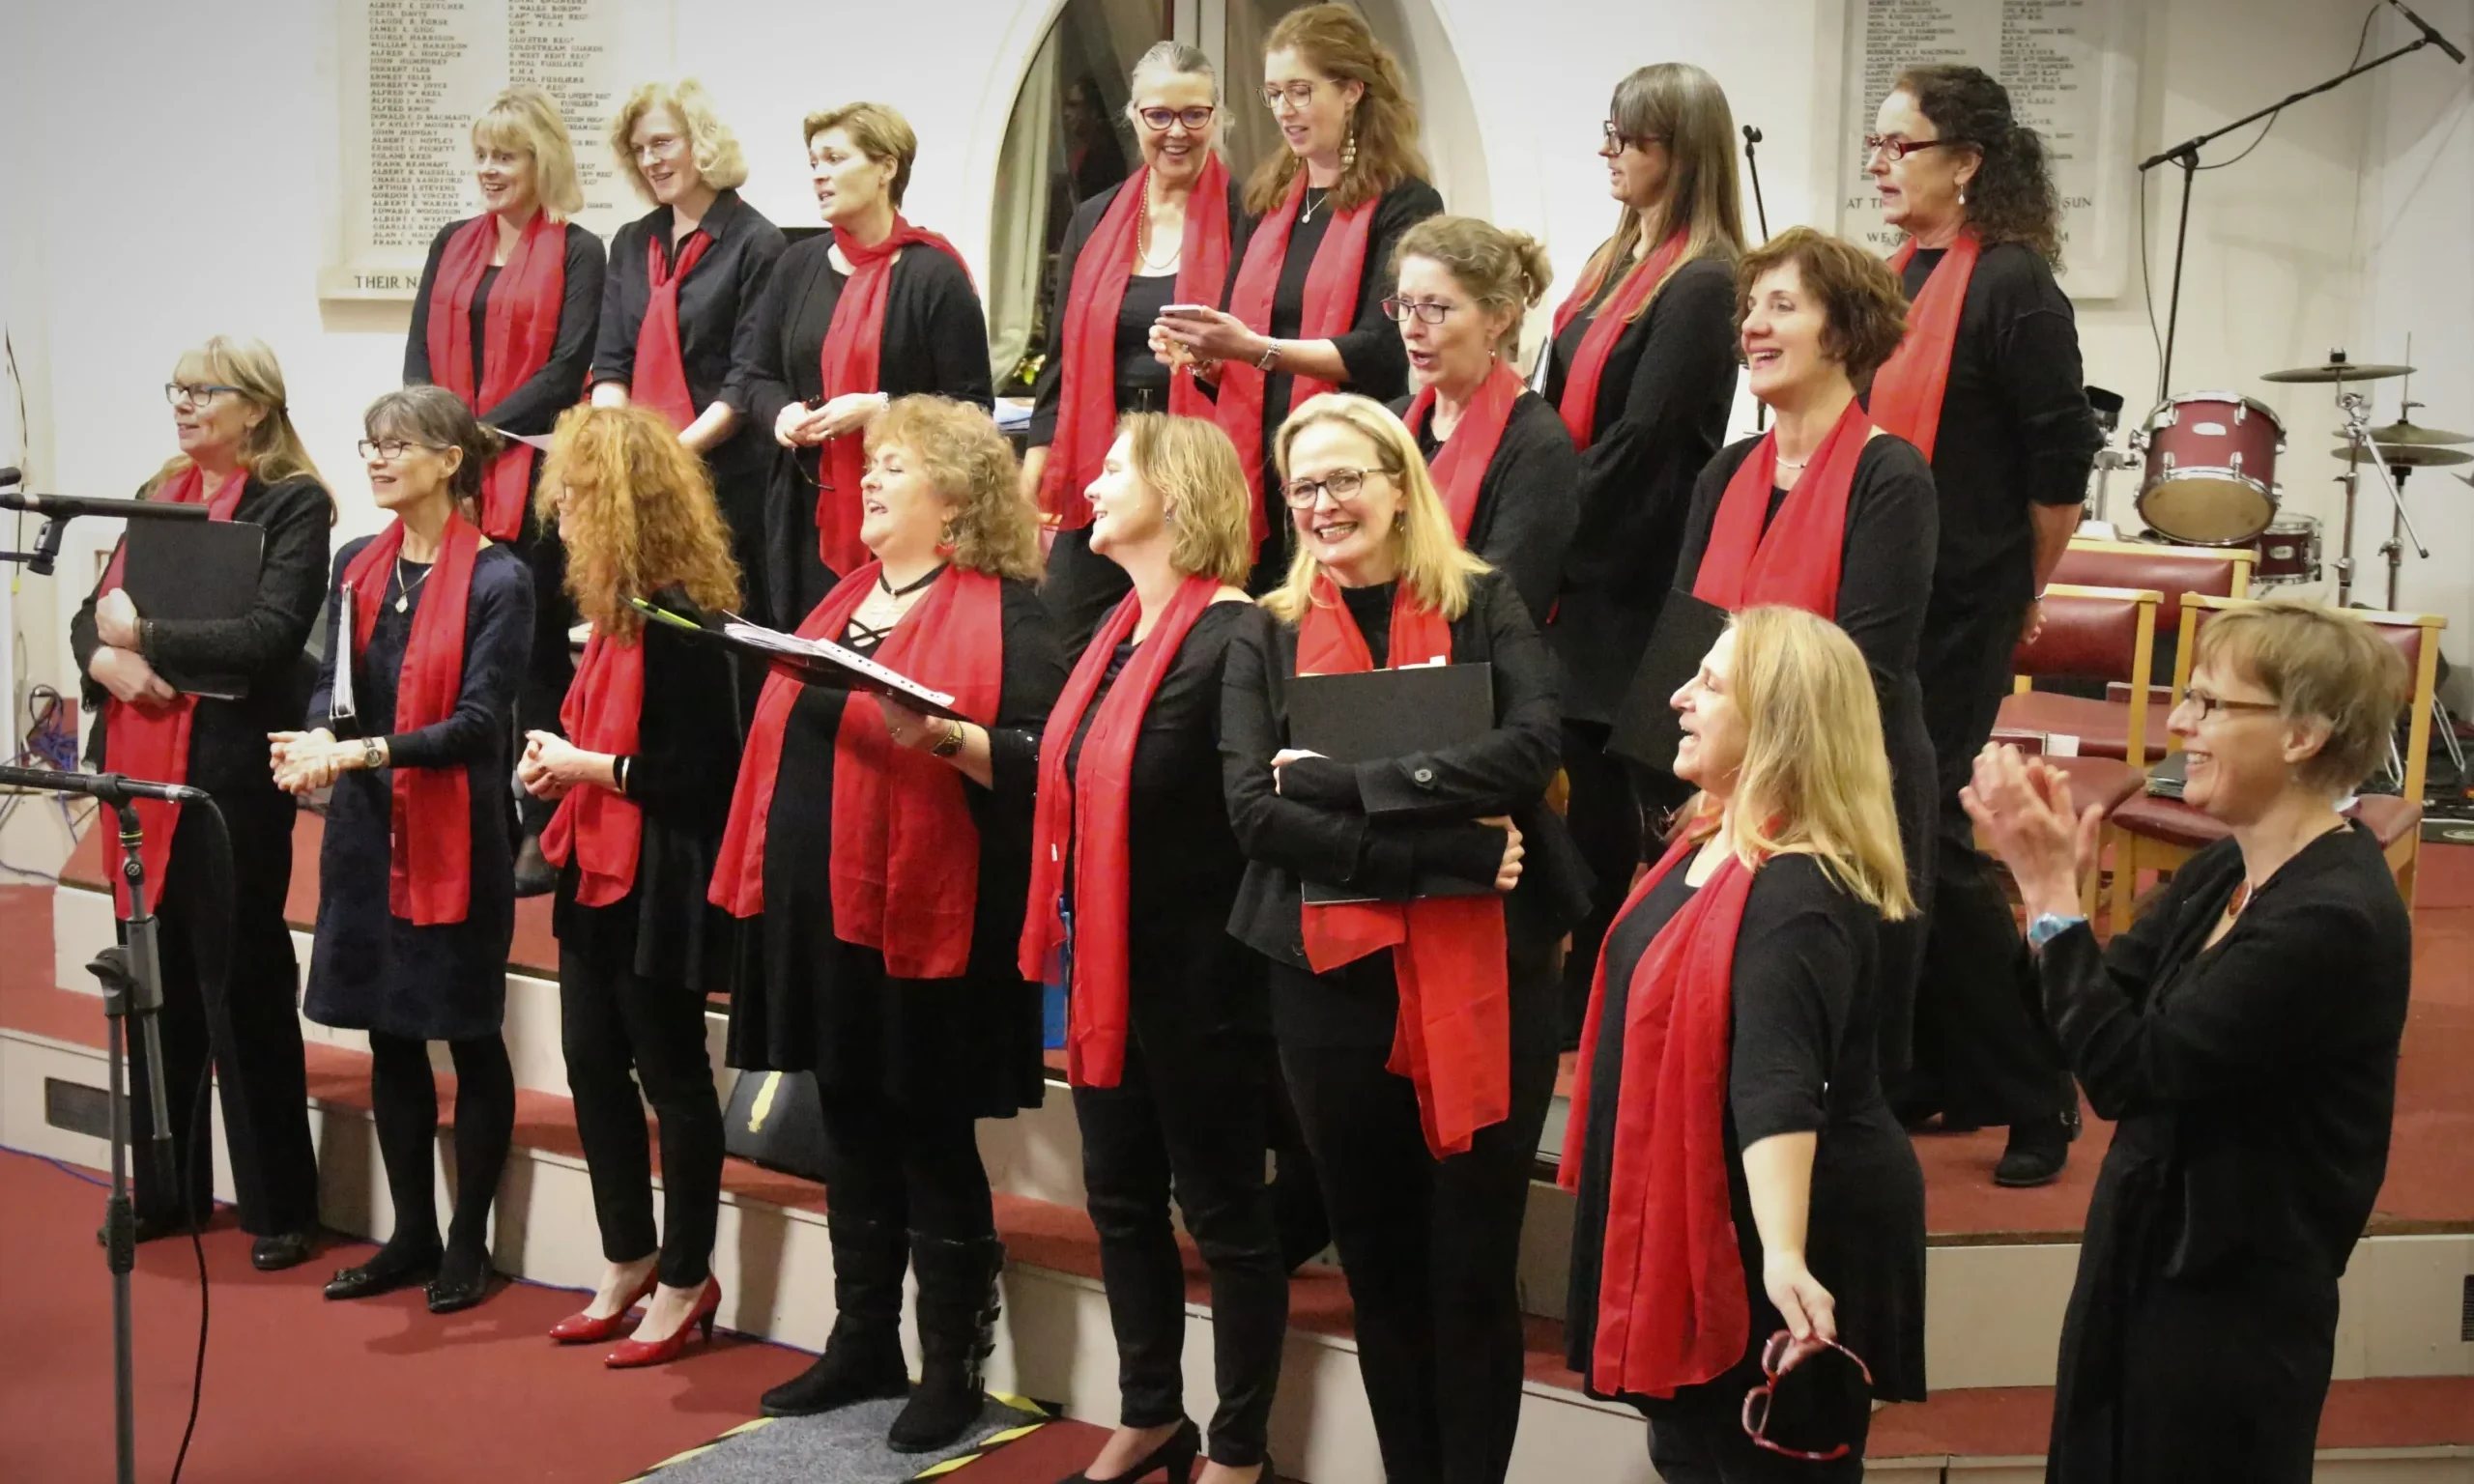 A choir of women in red scarves singing, joyfully captivating the audience with their harmonious voices. #ChoirCheering